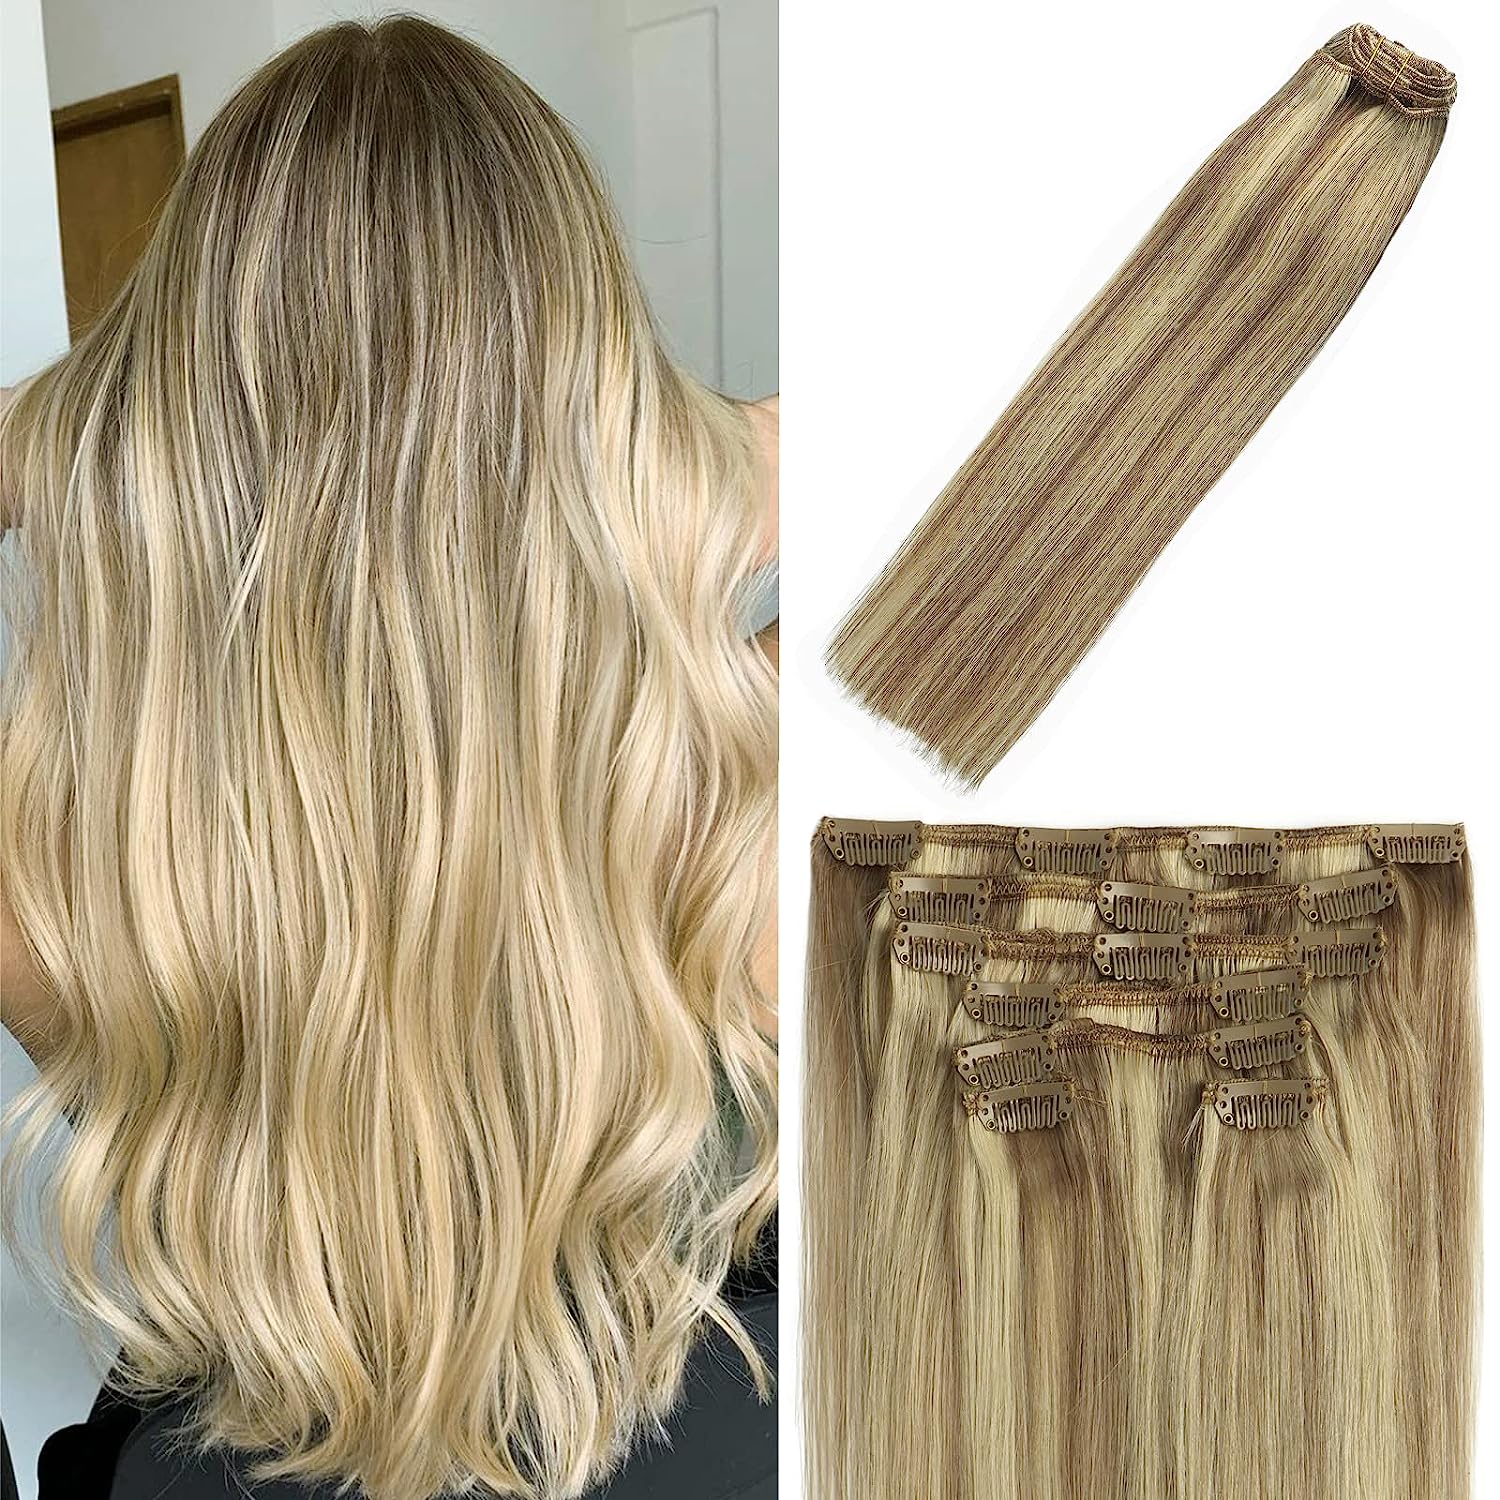 WindTouch Clip in Hair Extensions Human Hair Balayage [...]